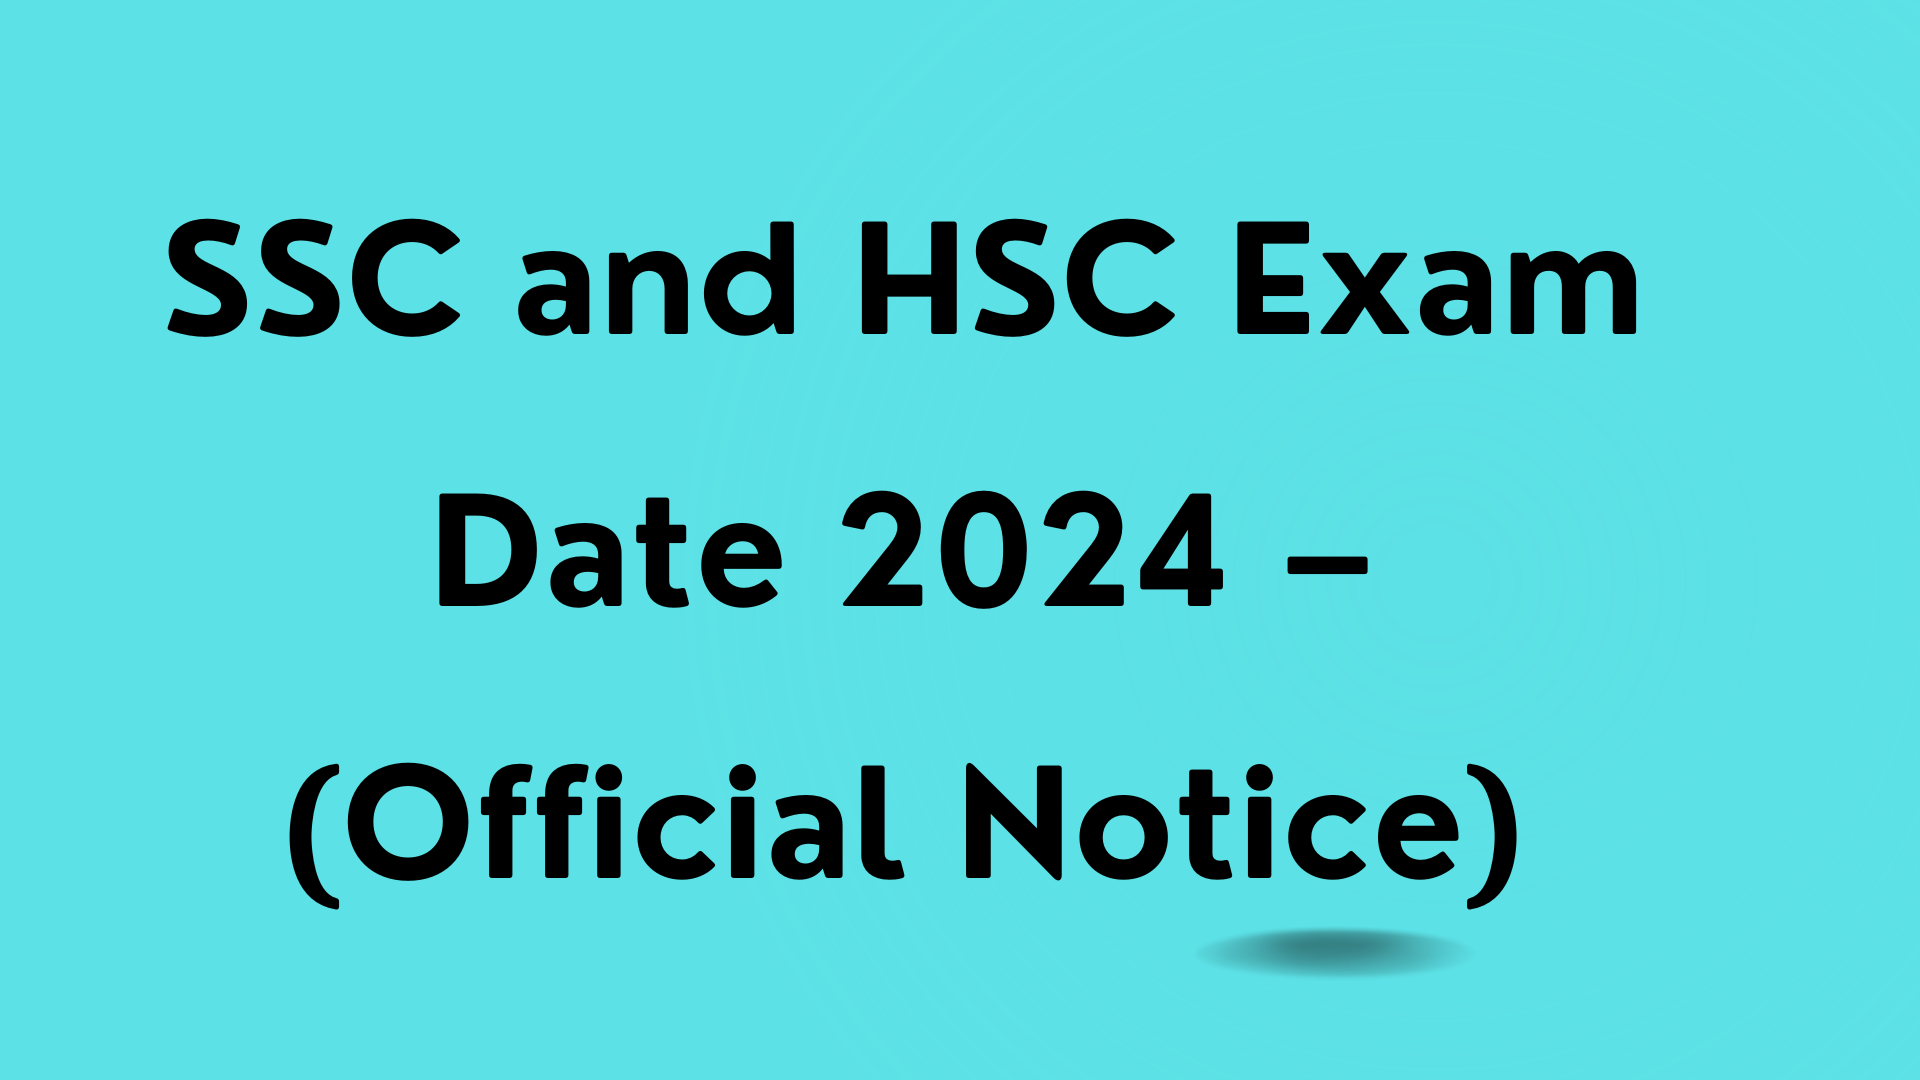 SSC and HSC Exam Date 2024 (Official Notice)